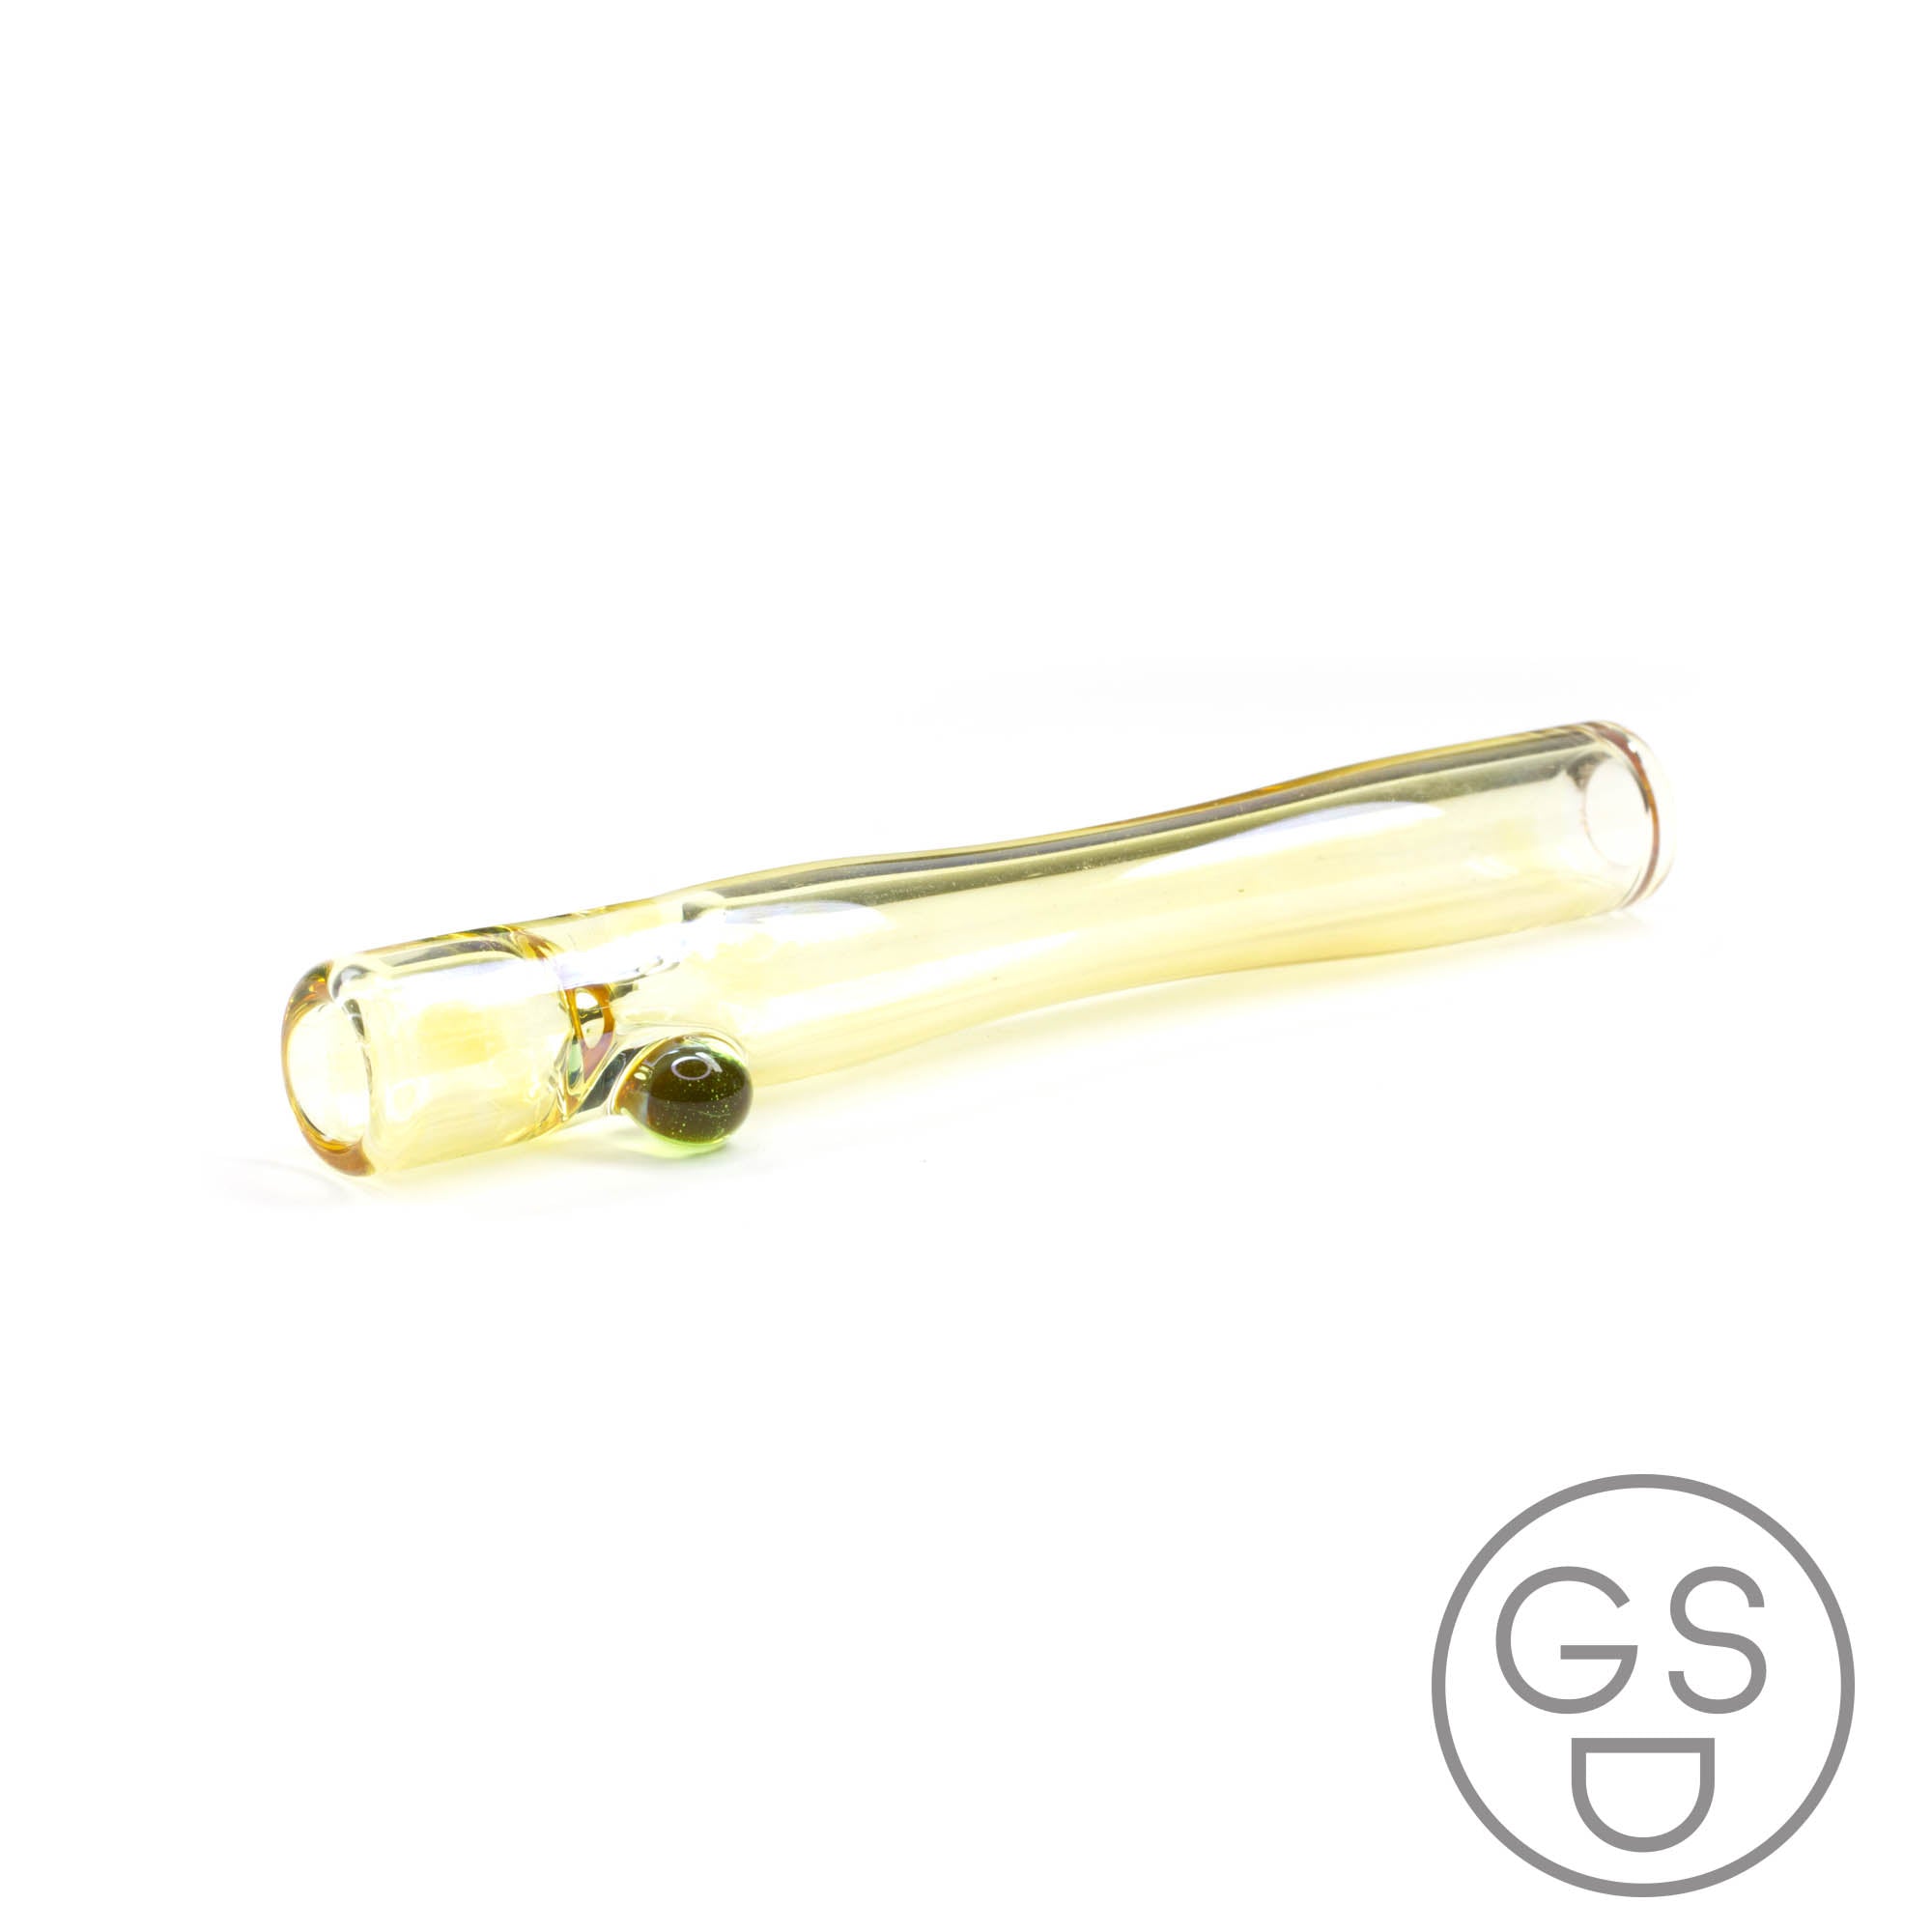 One Hitter Bat w/ Marble Roll-Stop